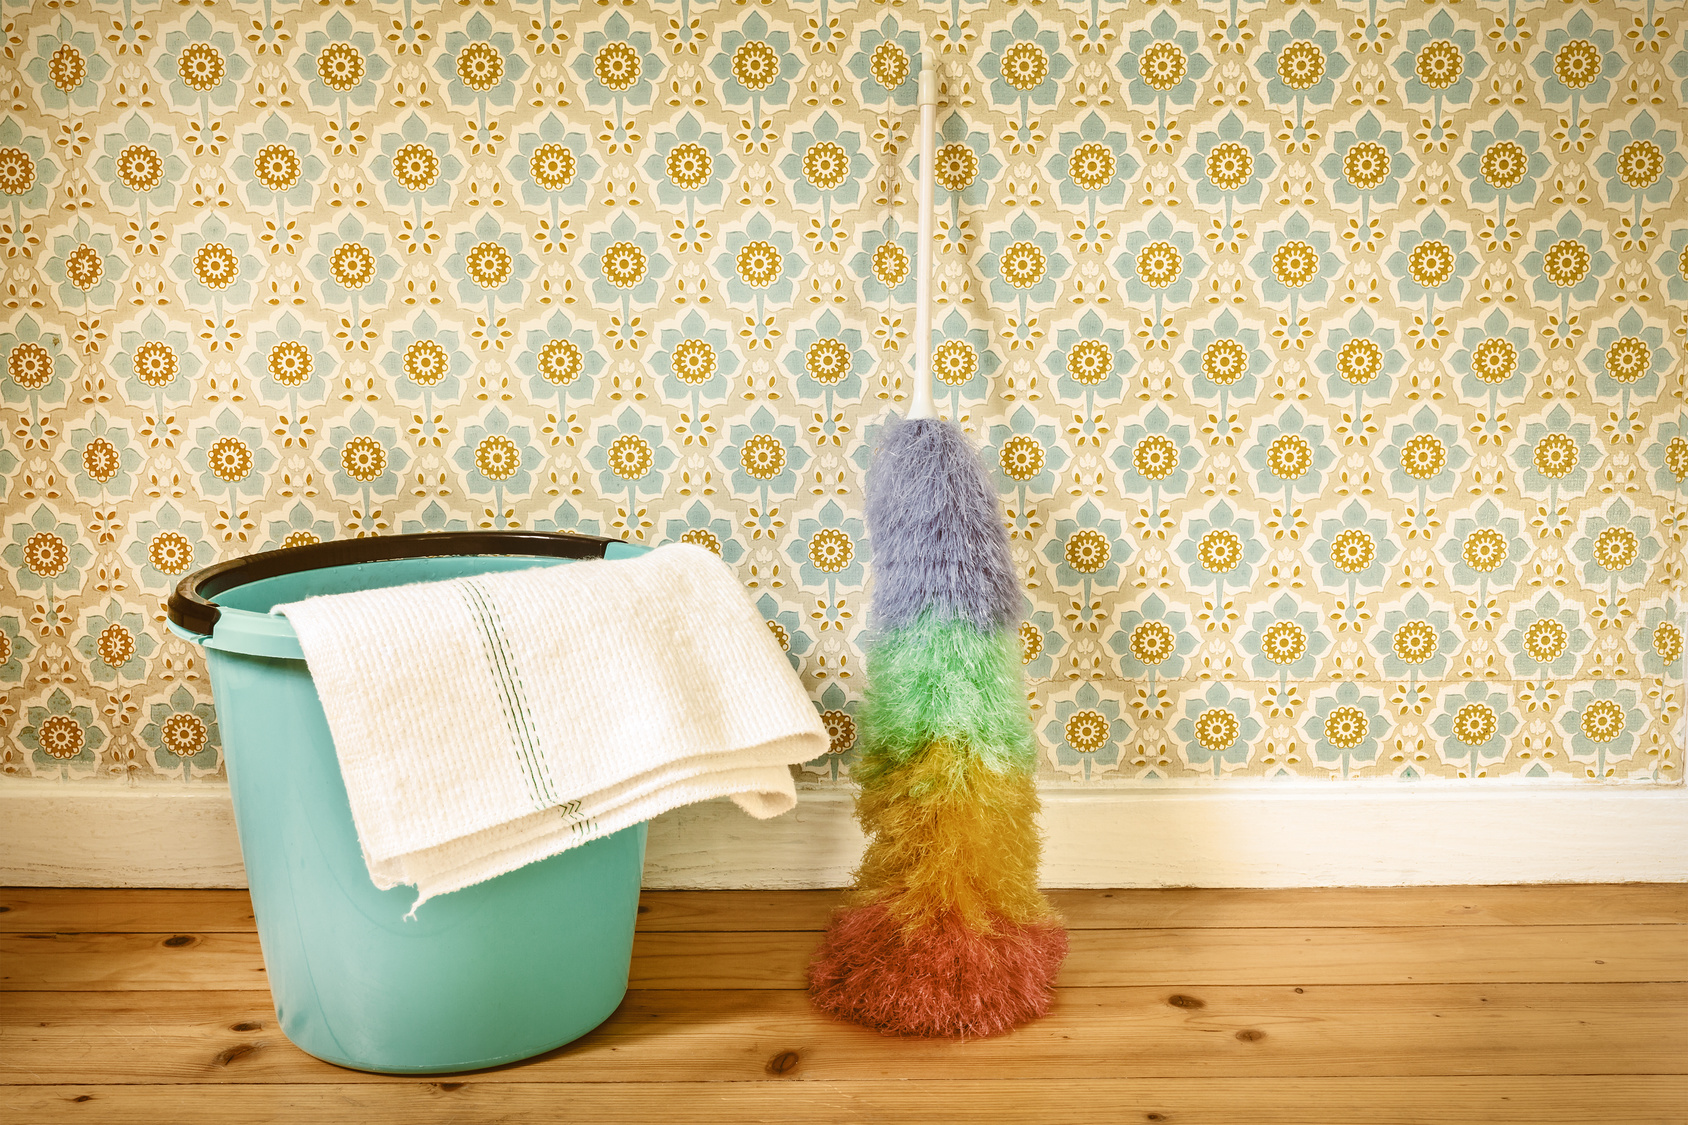 Golden Rules of Cleaning Wallpaper!!!